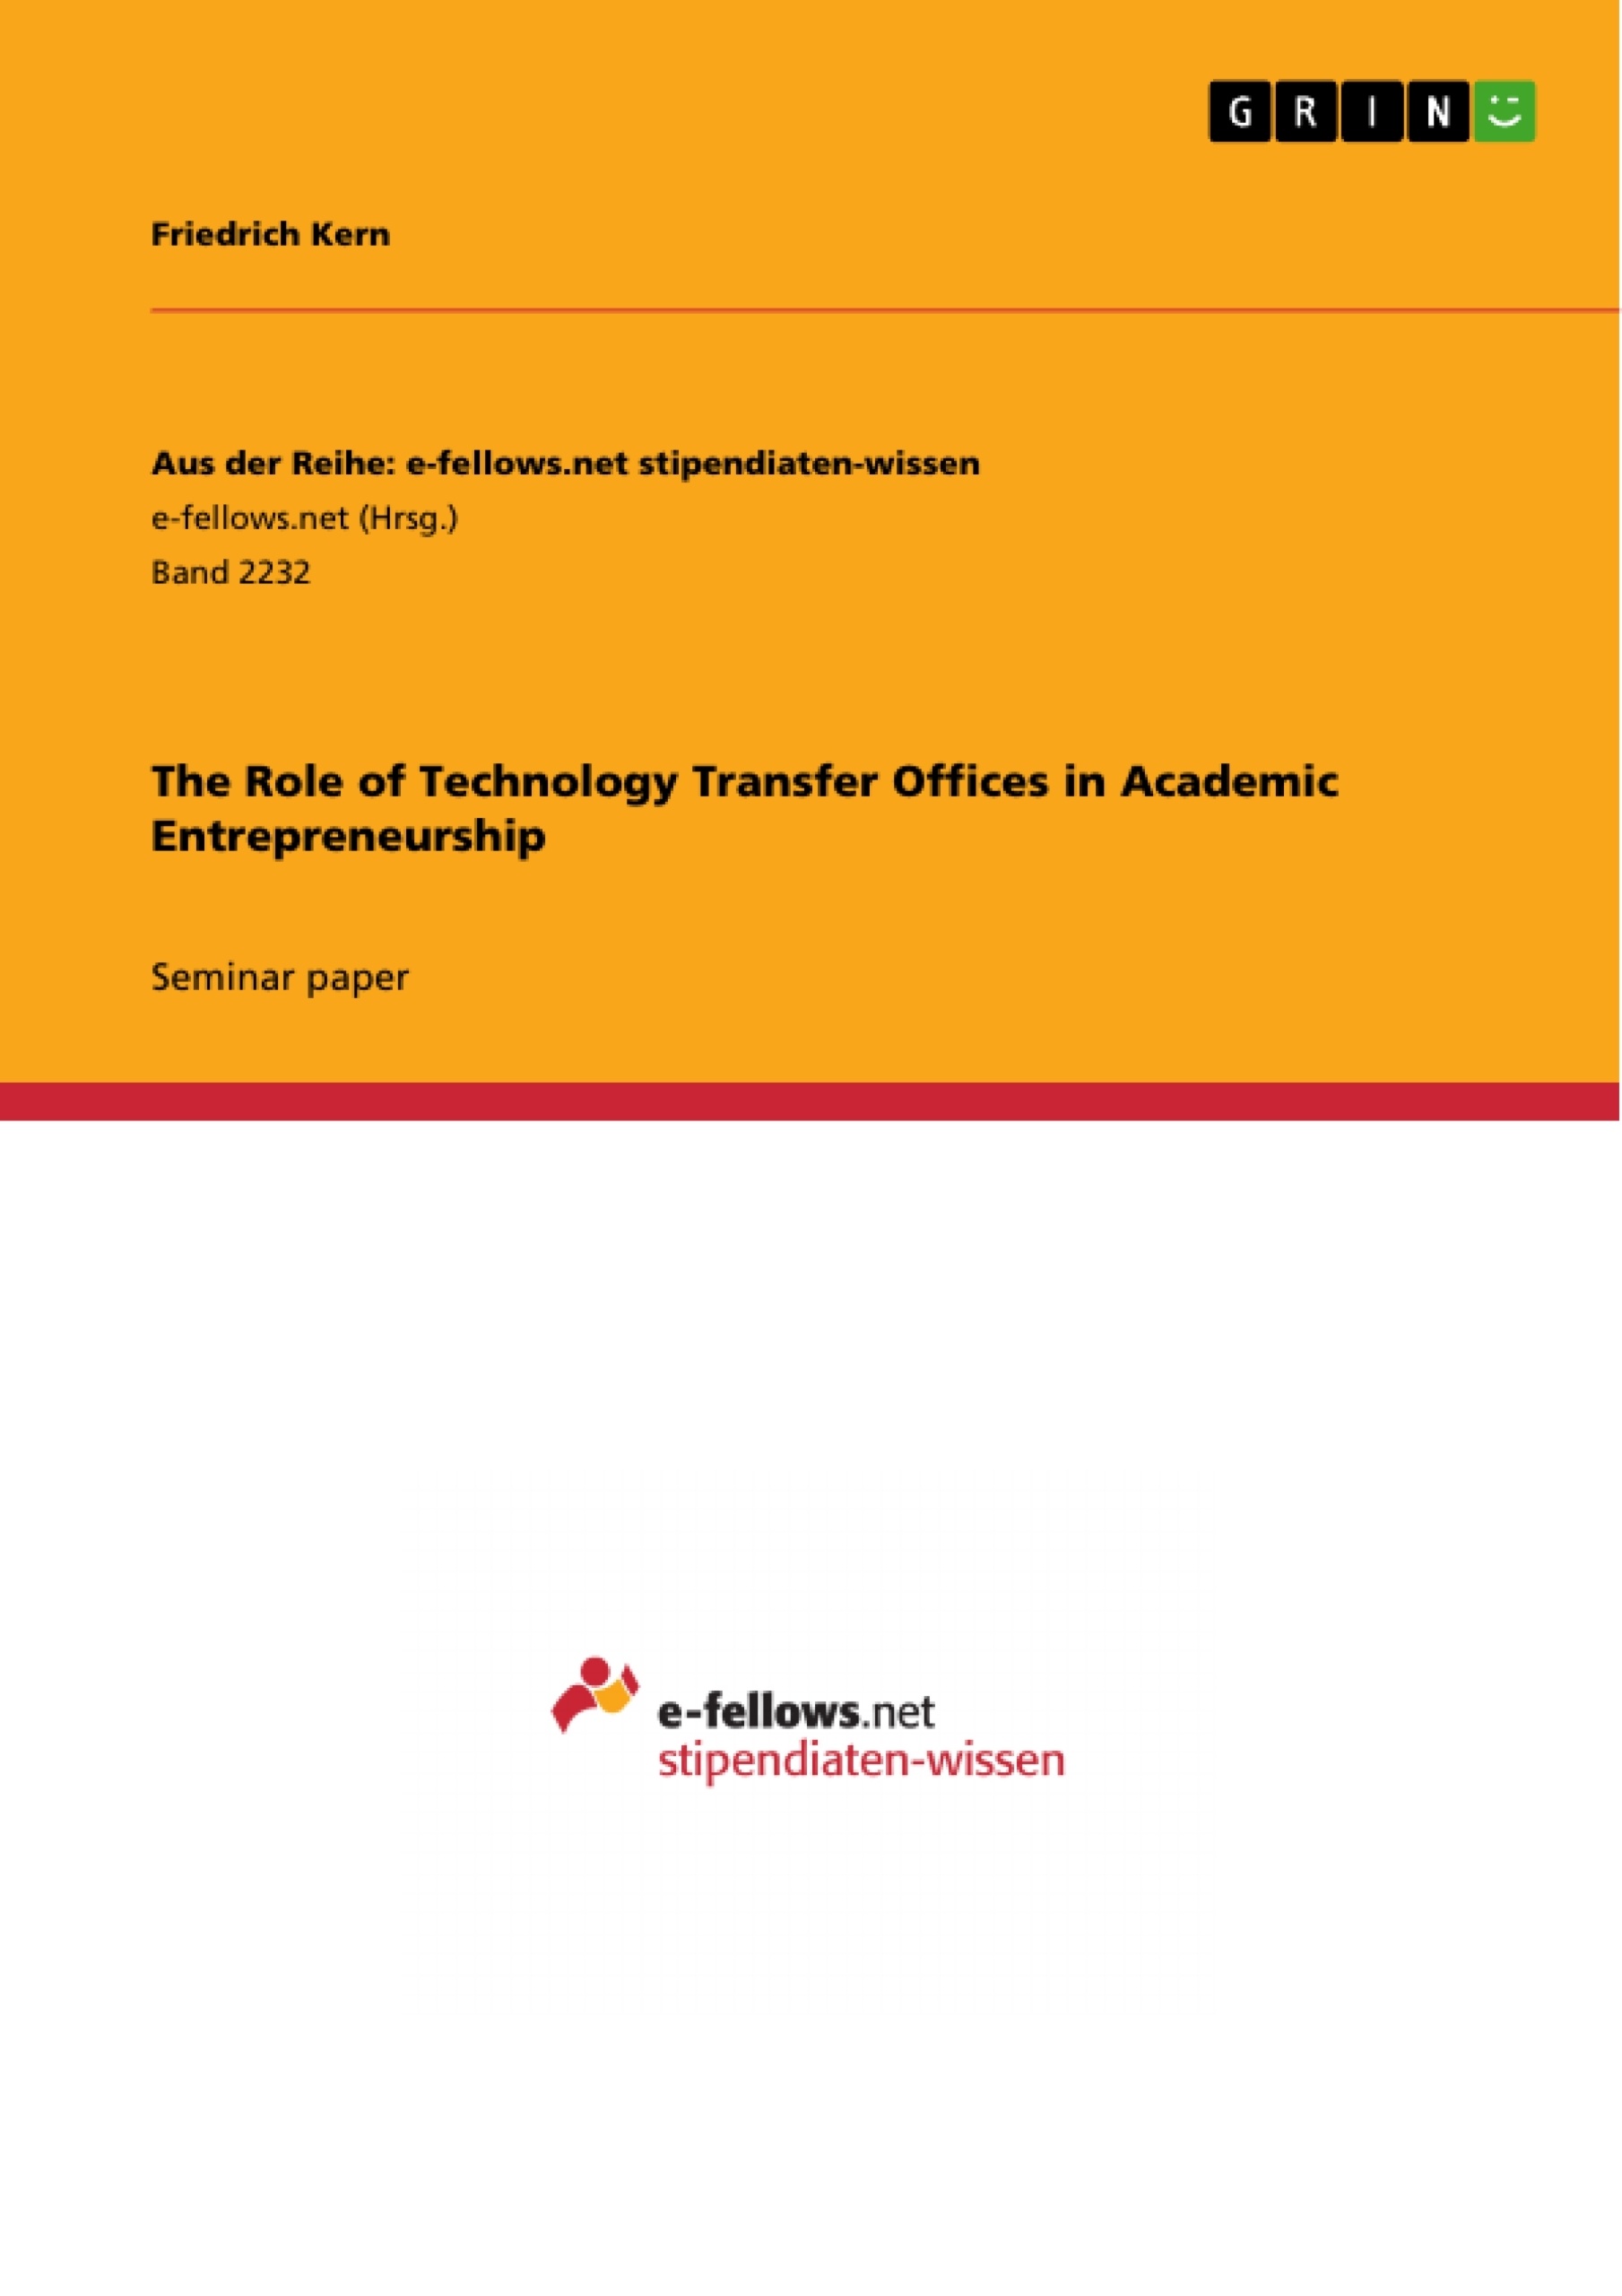 Título: The Role of Technology Transfer Offices in Academic Entrepreneurship